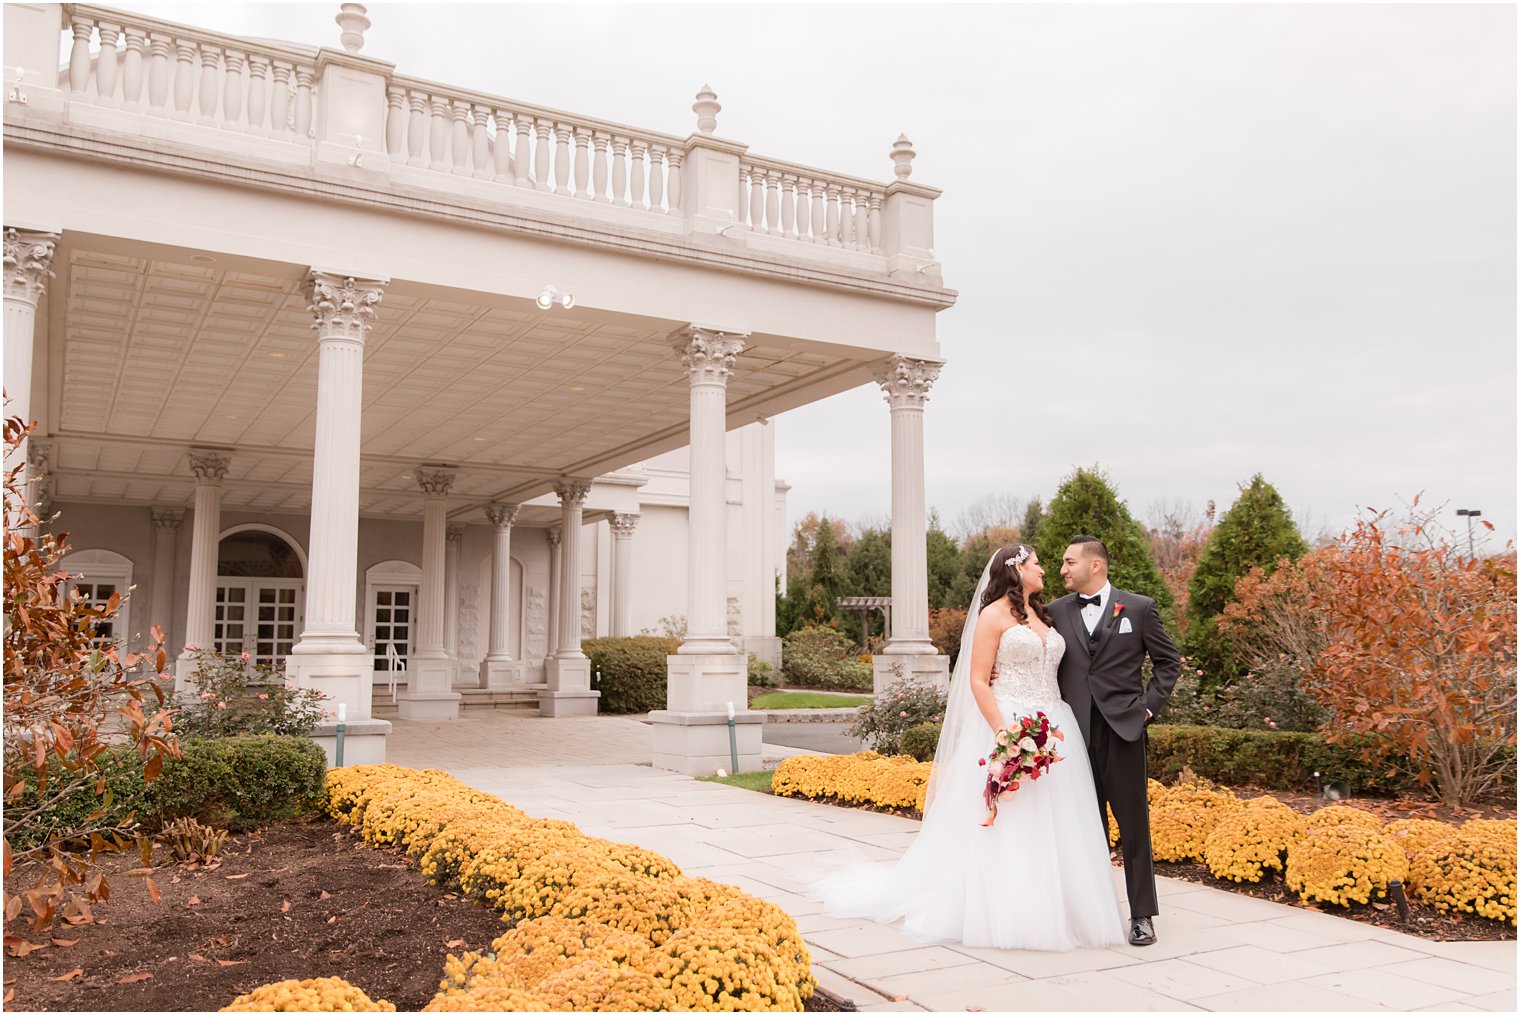 Wedding at The Palace at Somerset Park photographed by Idalia Photography